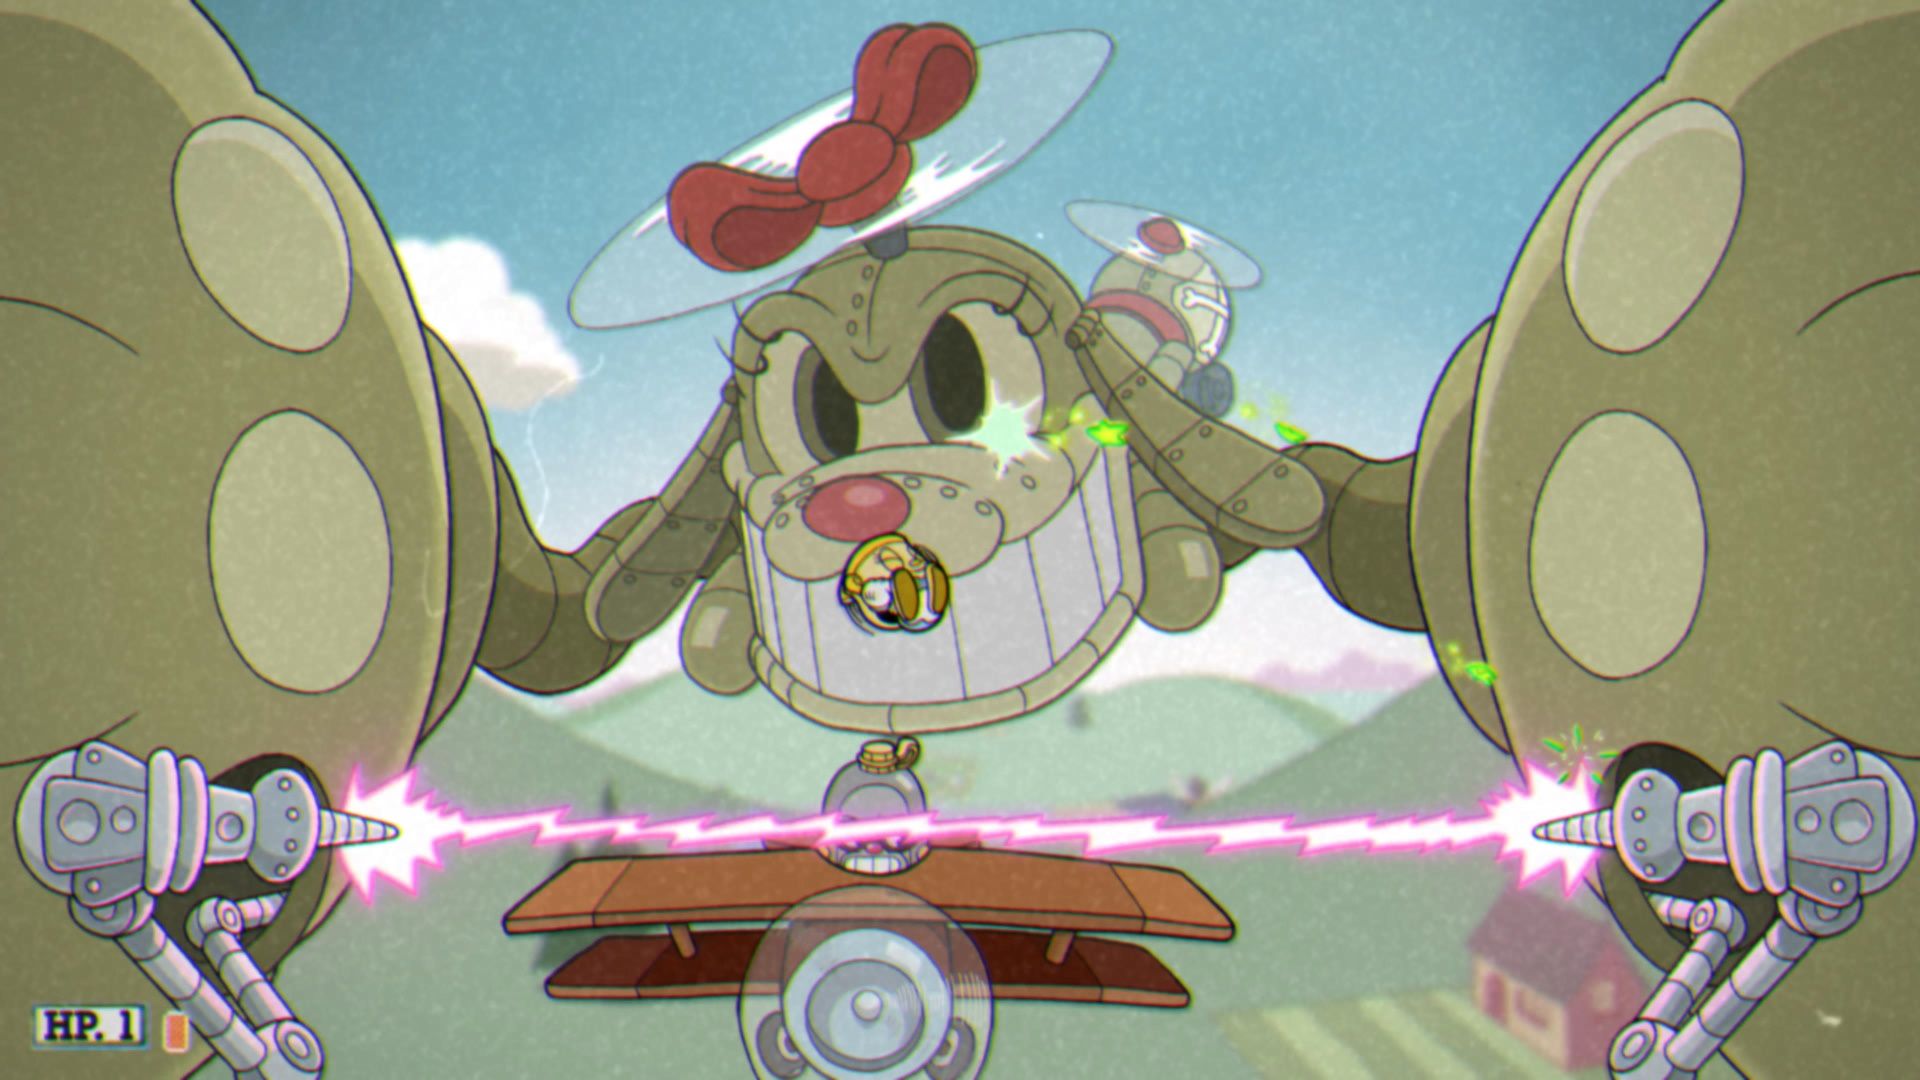 Cuphead The Delicious Course, The Howling Aces, Ms. Chalice double jump